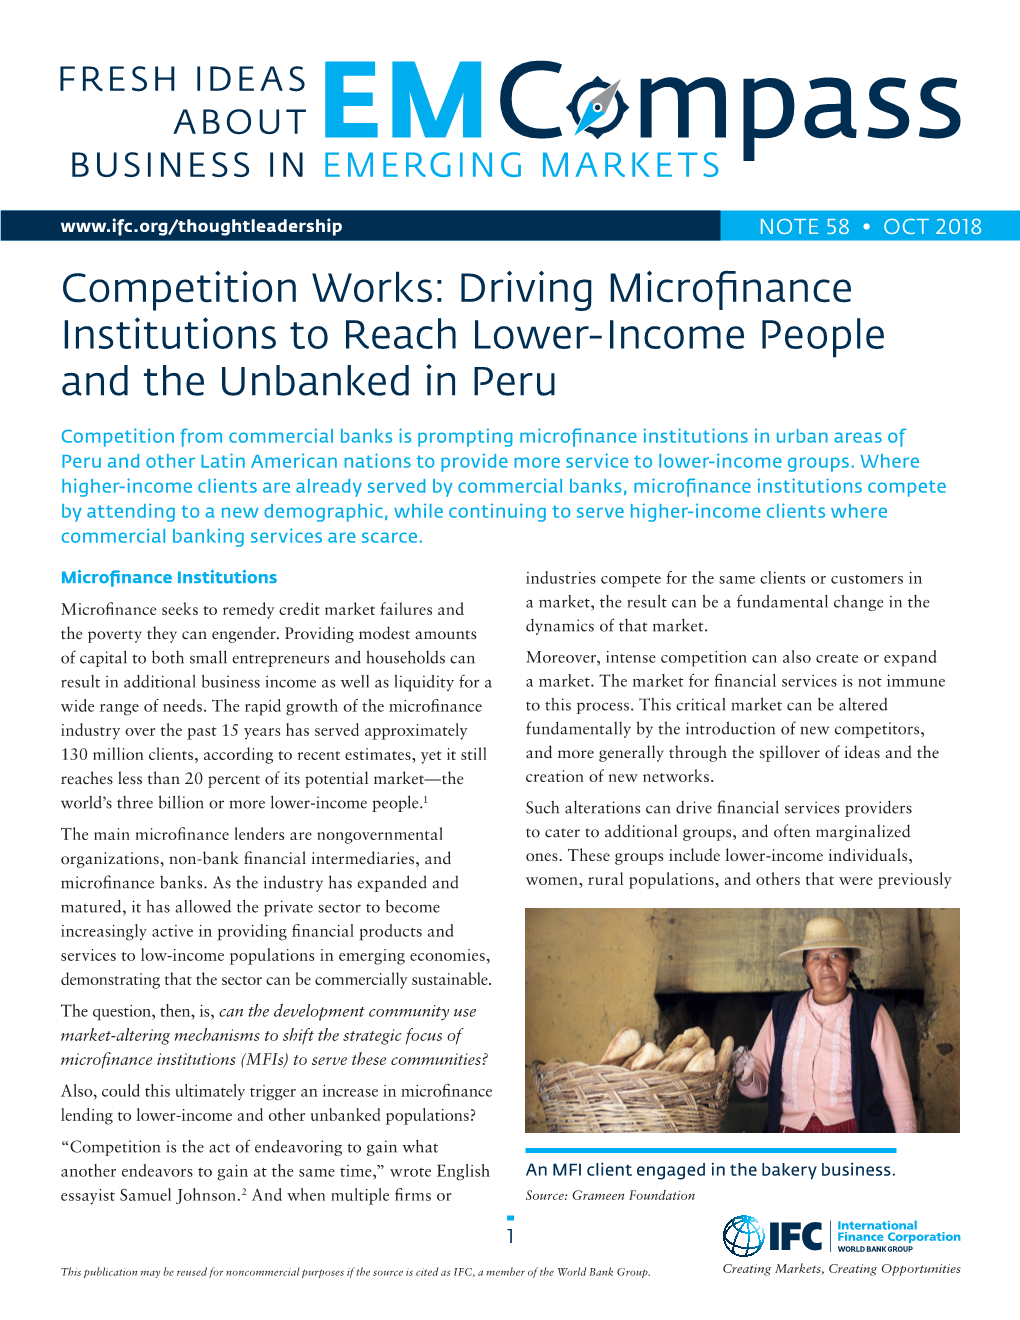 Driving Microfinance Institutions to Reach Lower-Income People and the Unbanked in Peru